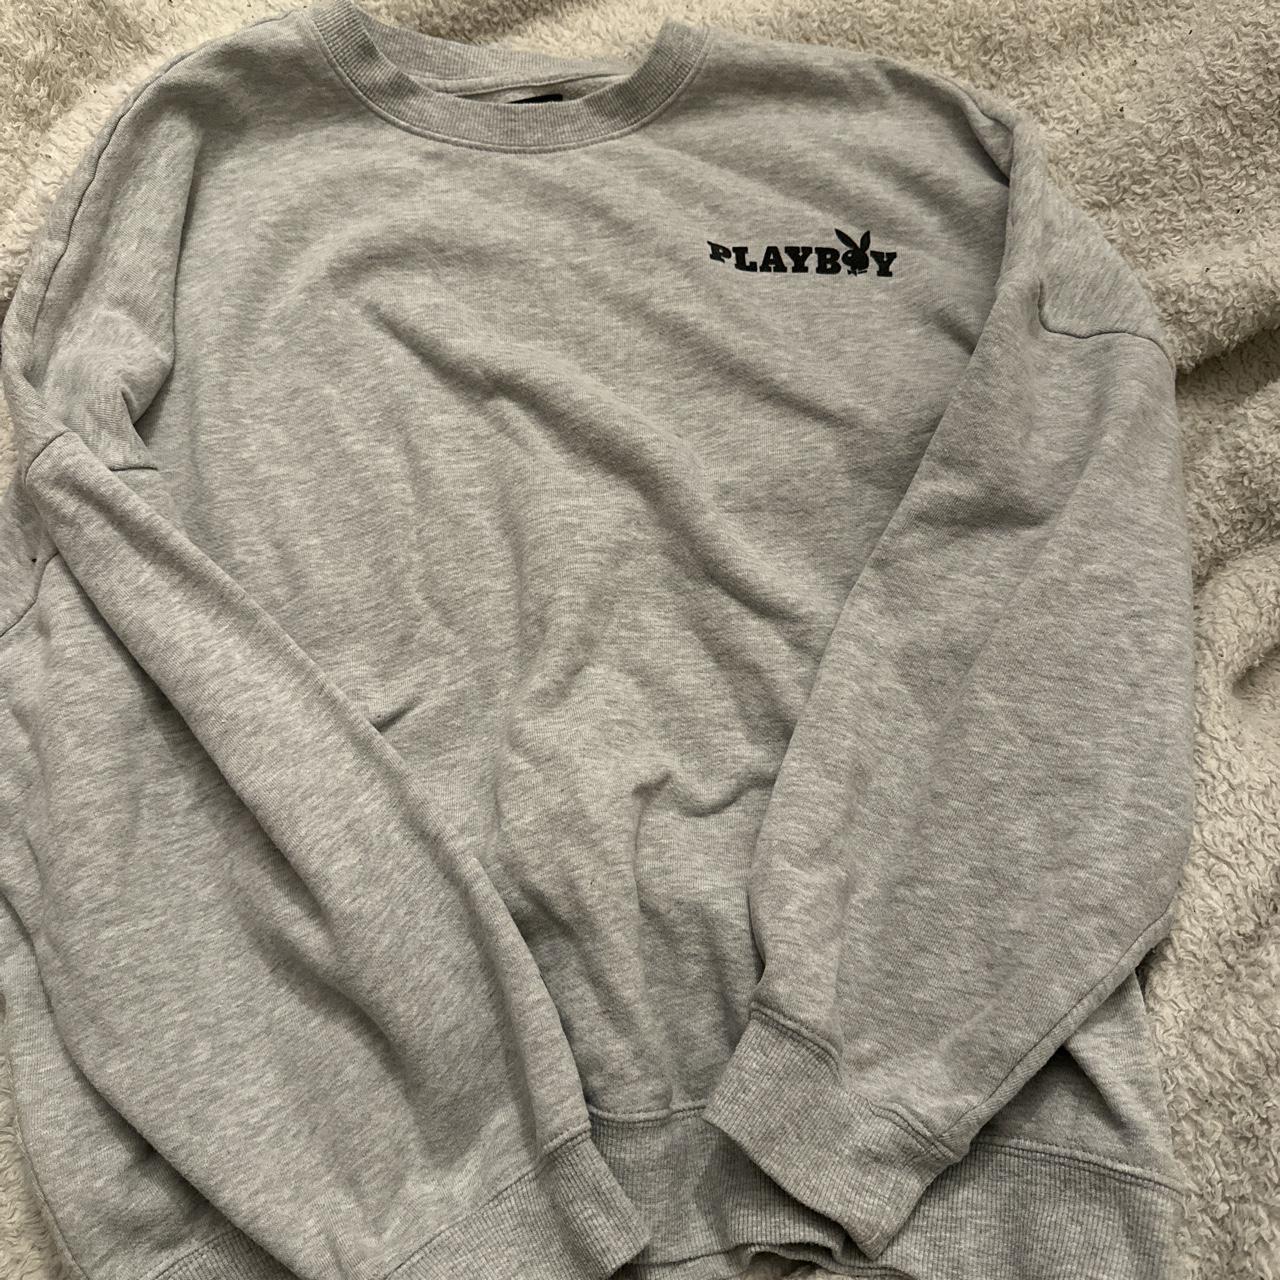 Playboy hoodie from pacsun Worn once #pacsun... - Depop